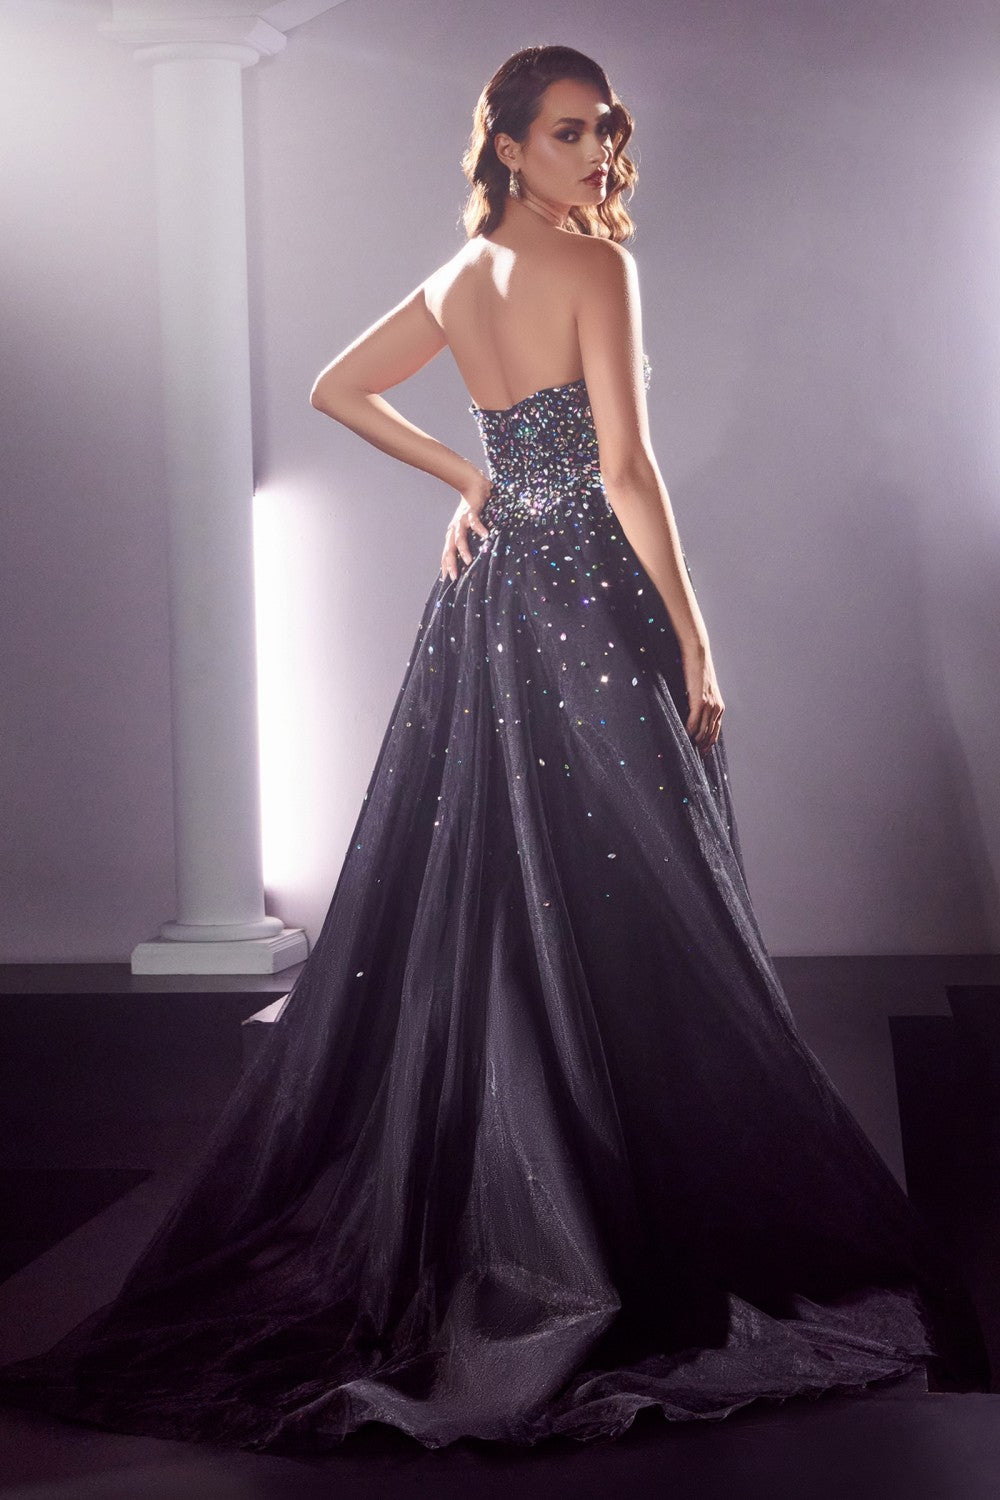 Black_1 Strapless with Jewel Accents Gown CB114 - Women Evening Formal Gown - Special Occasion